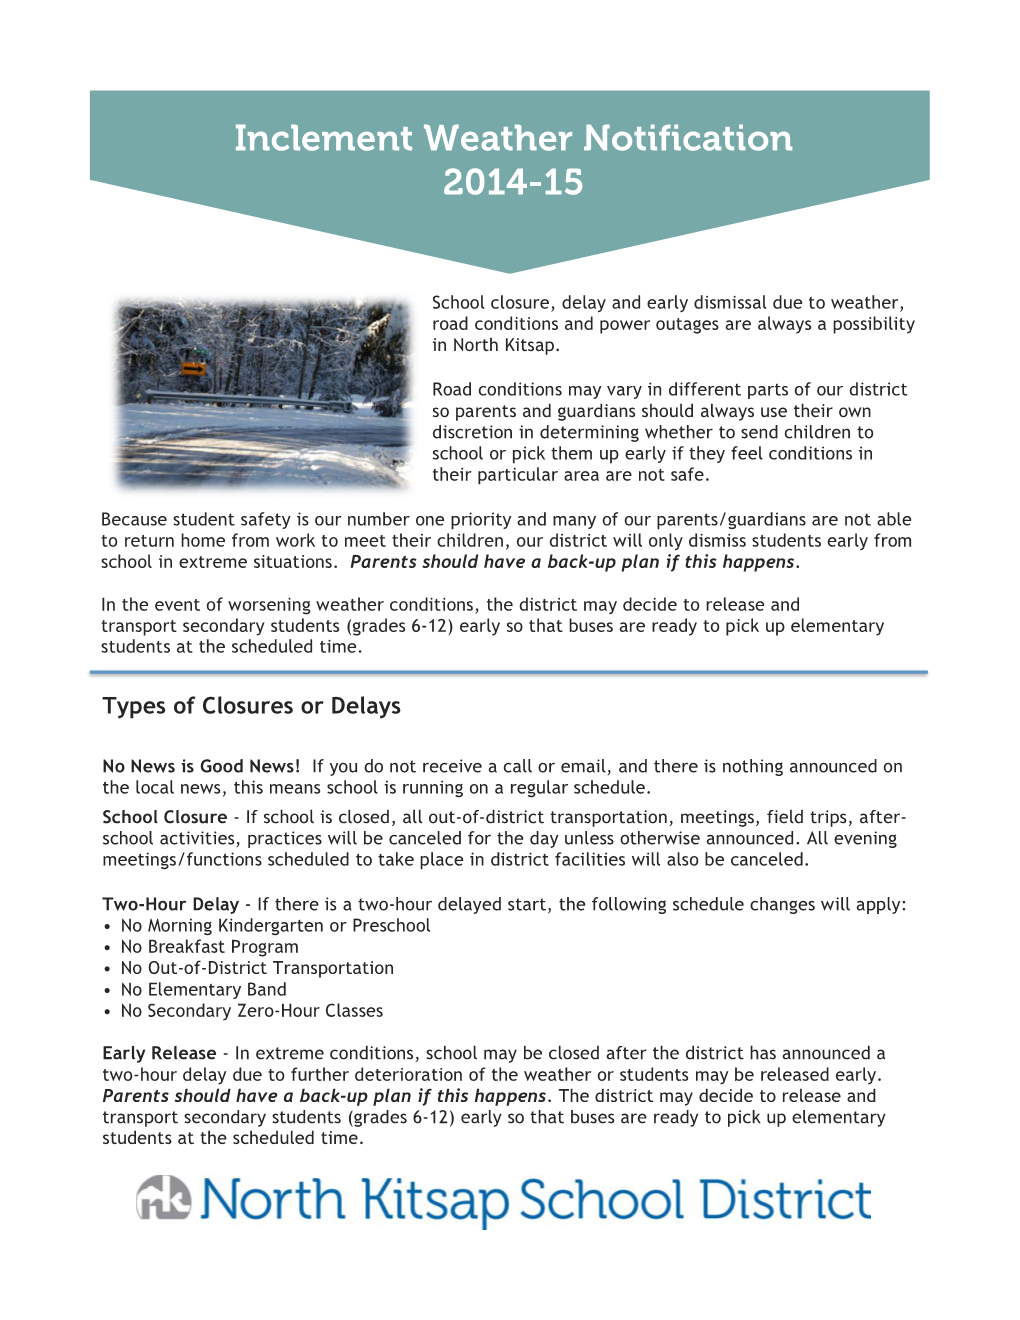 Inclement Weather Notification 2014-15